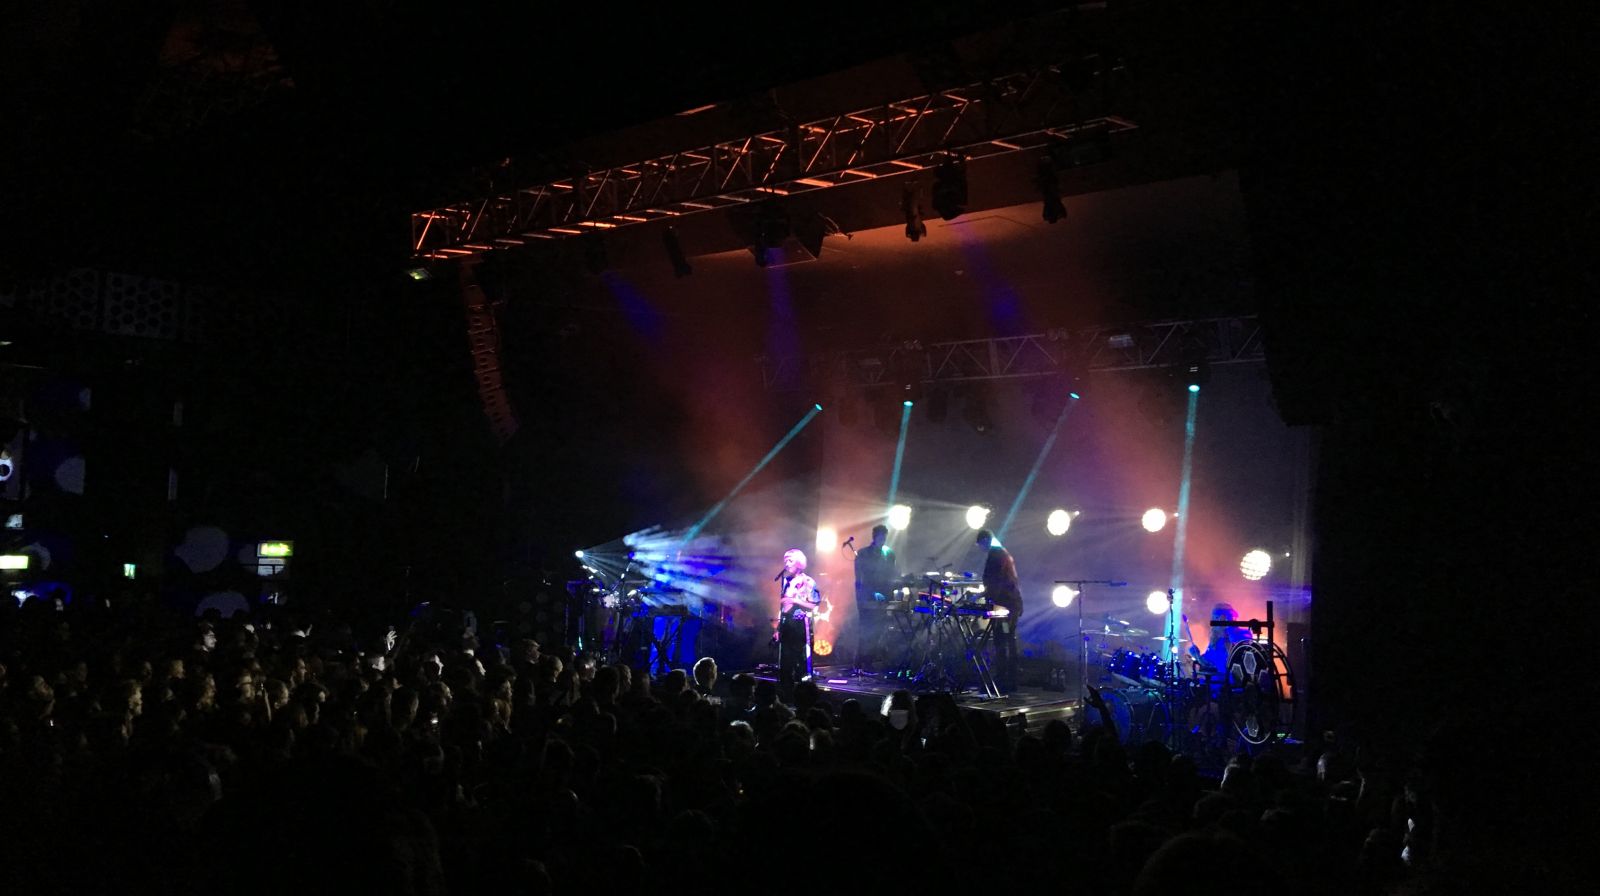 Maribou State live at the O2 Academy Bristol // Friday 8th March 2019.